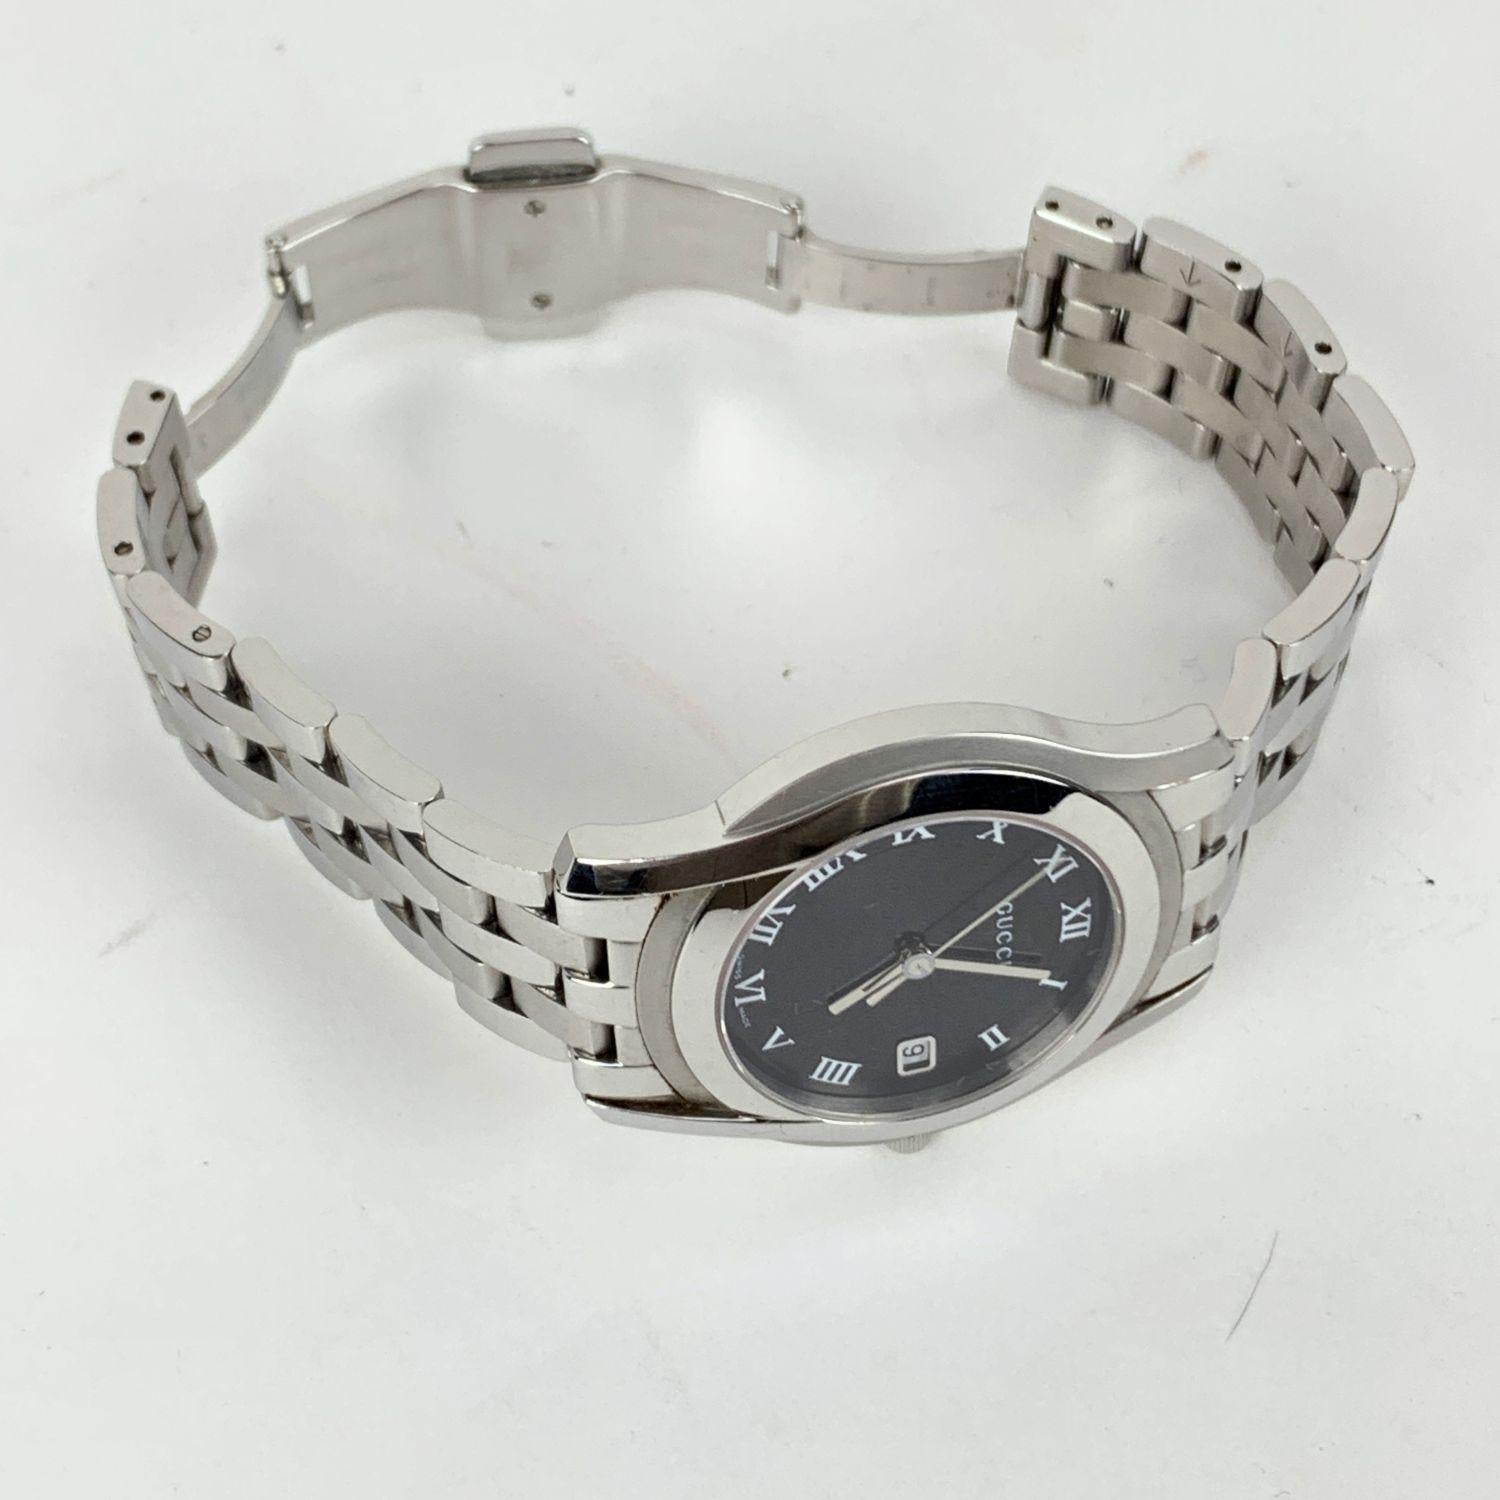 Gucci Silver Stainless Steel Mod 5500 M Unisex Wrist Watch Black Dial 4